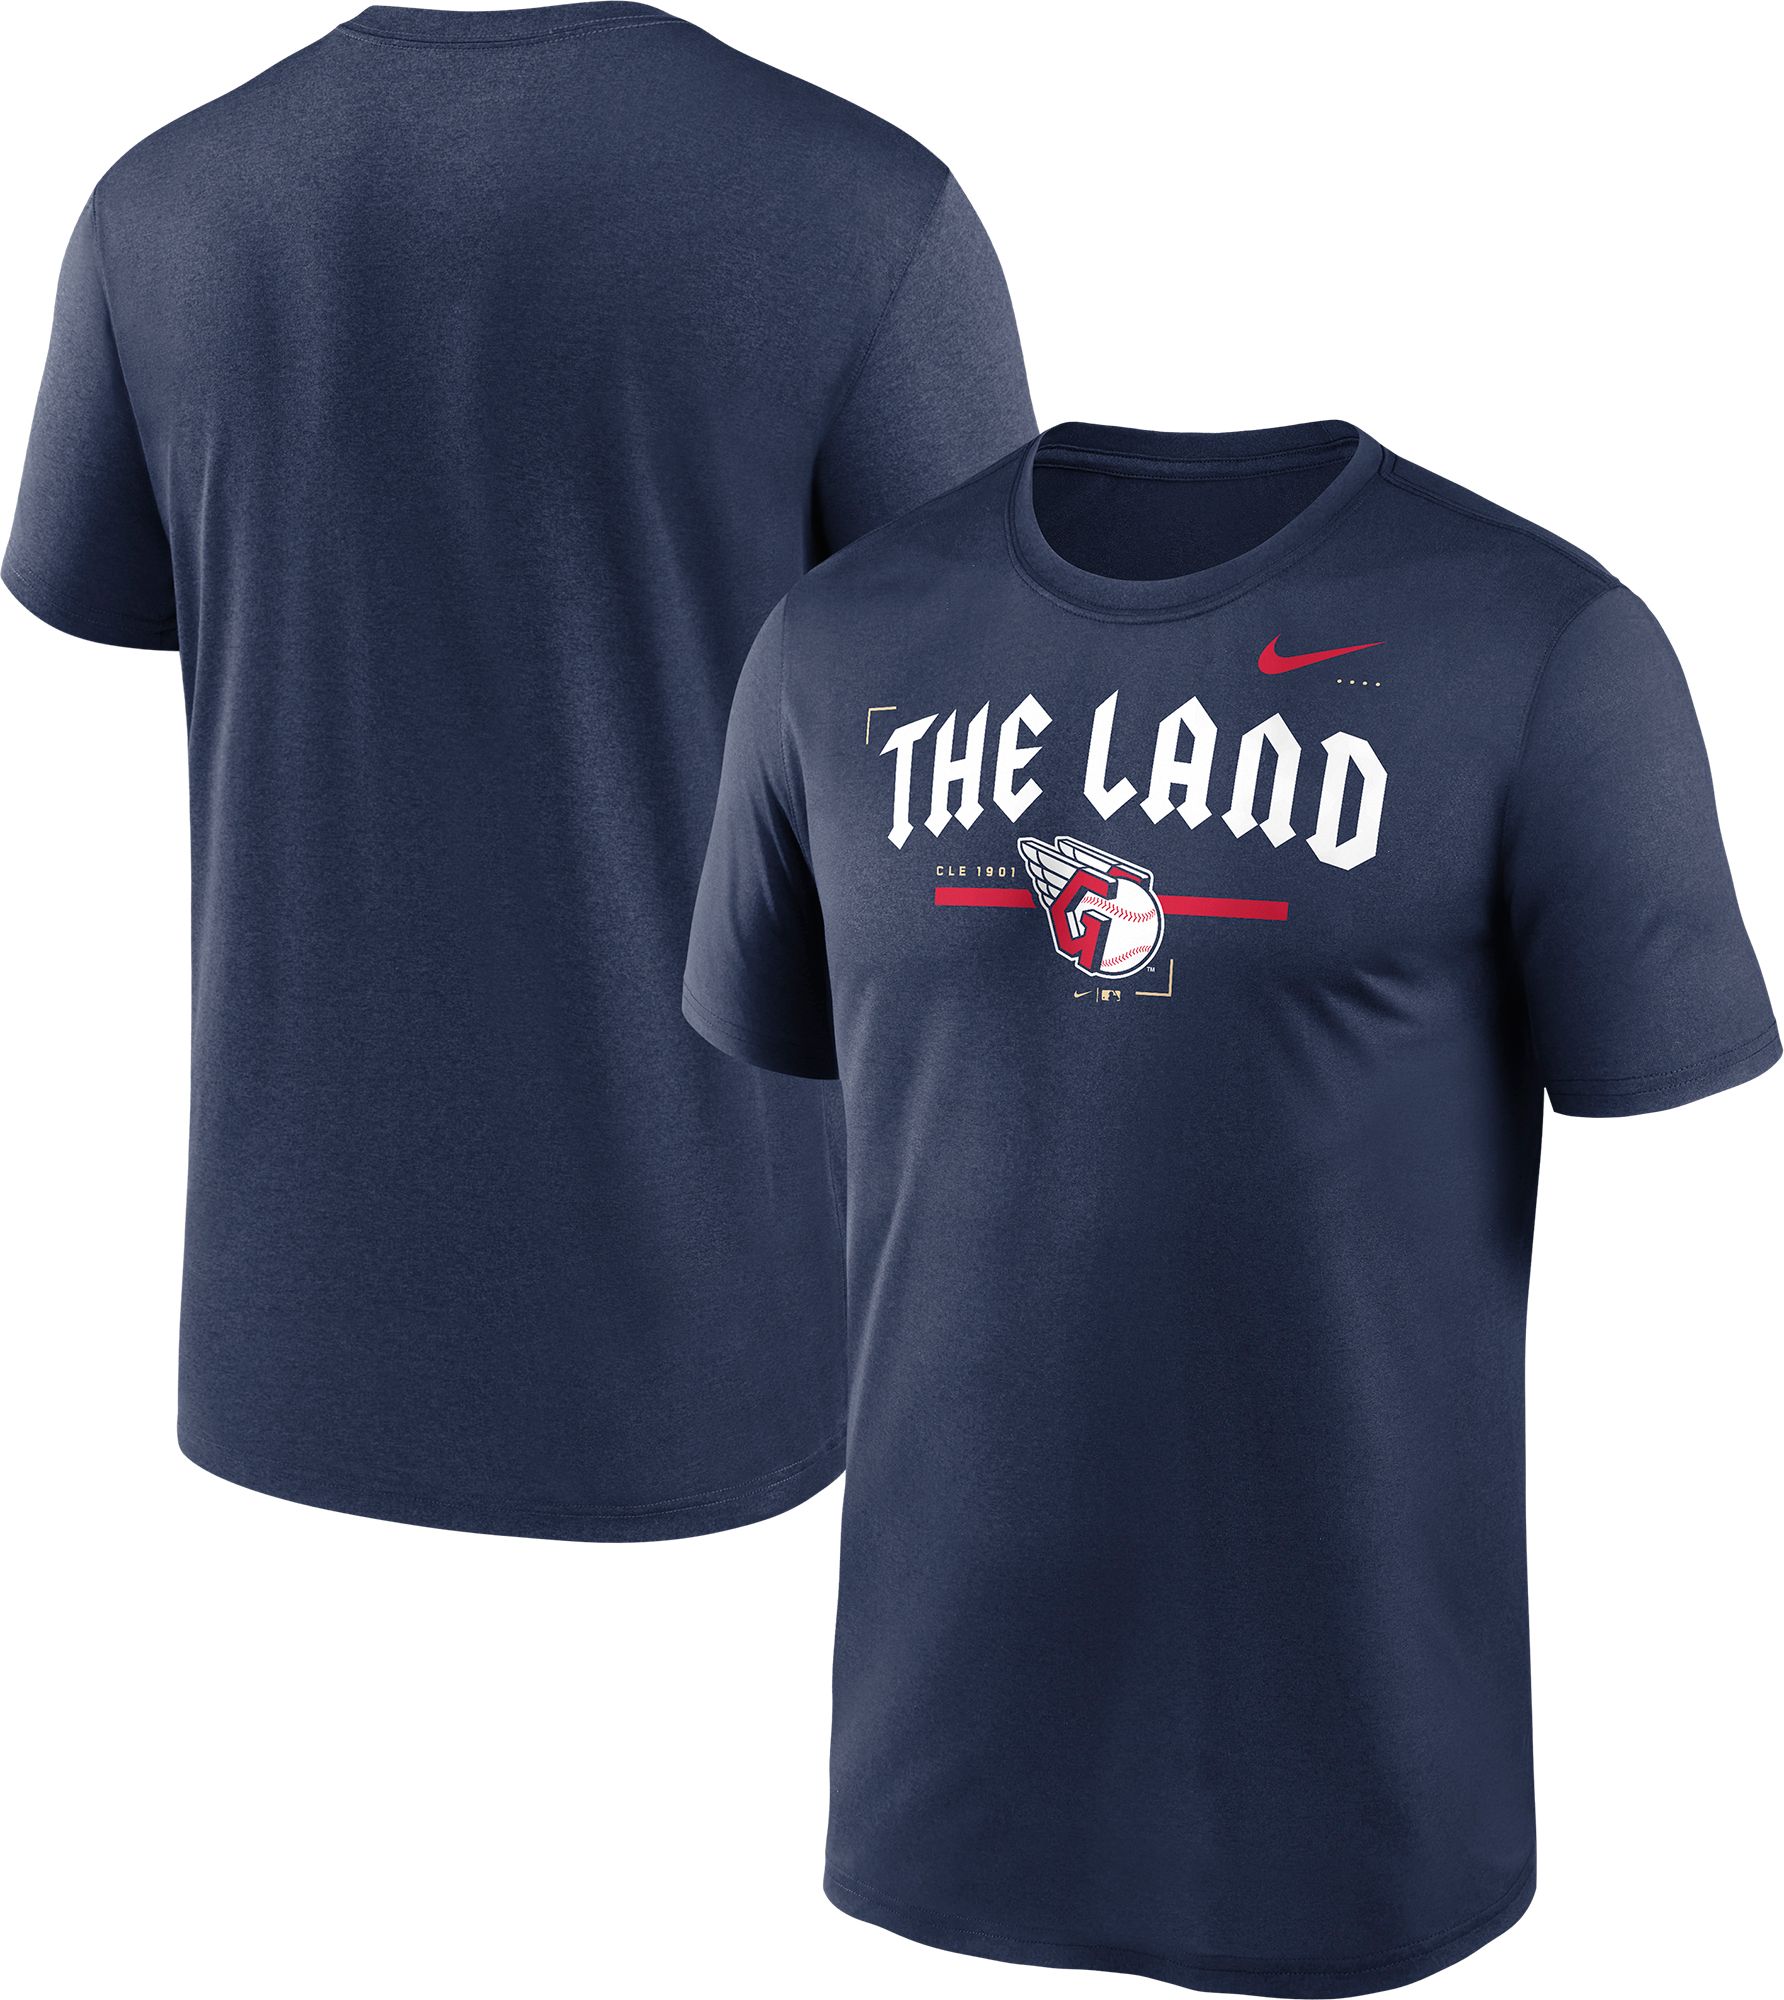 Looking for new Cleveland Guardians gear for 2022 season? Check